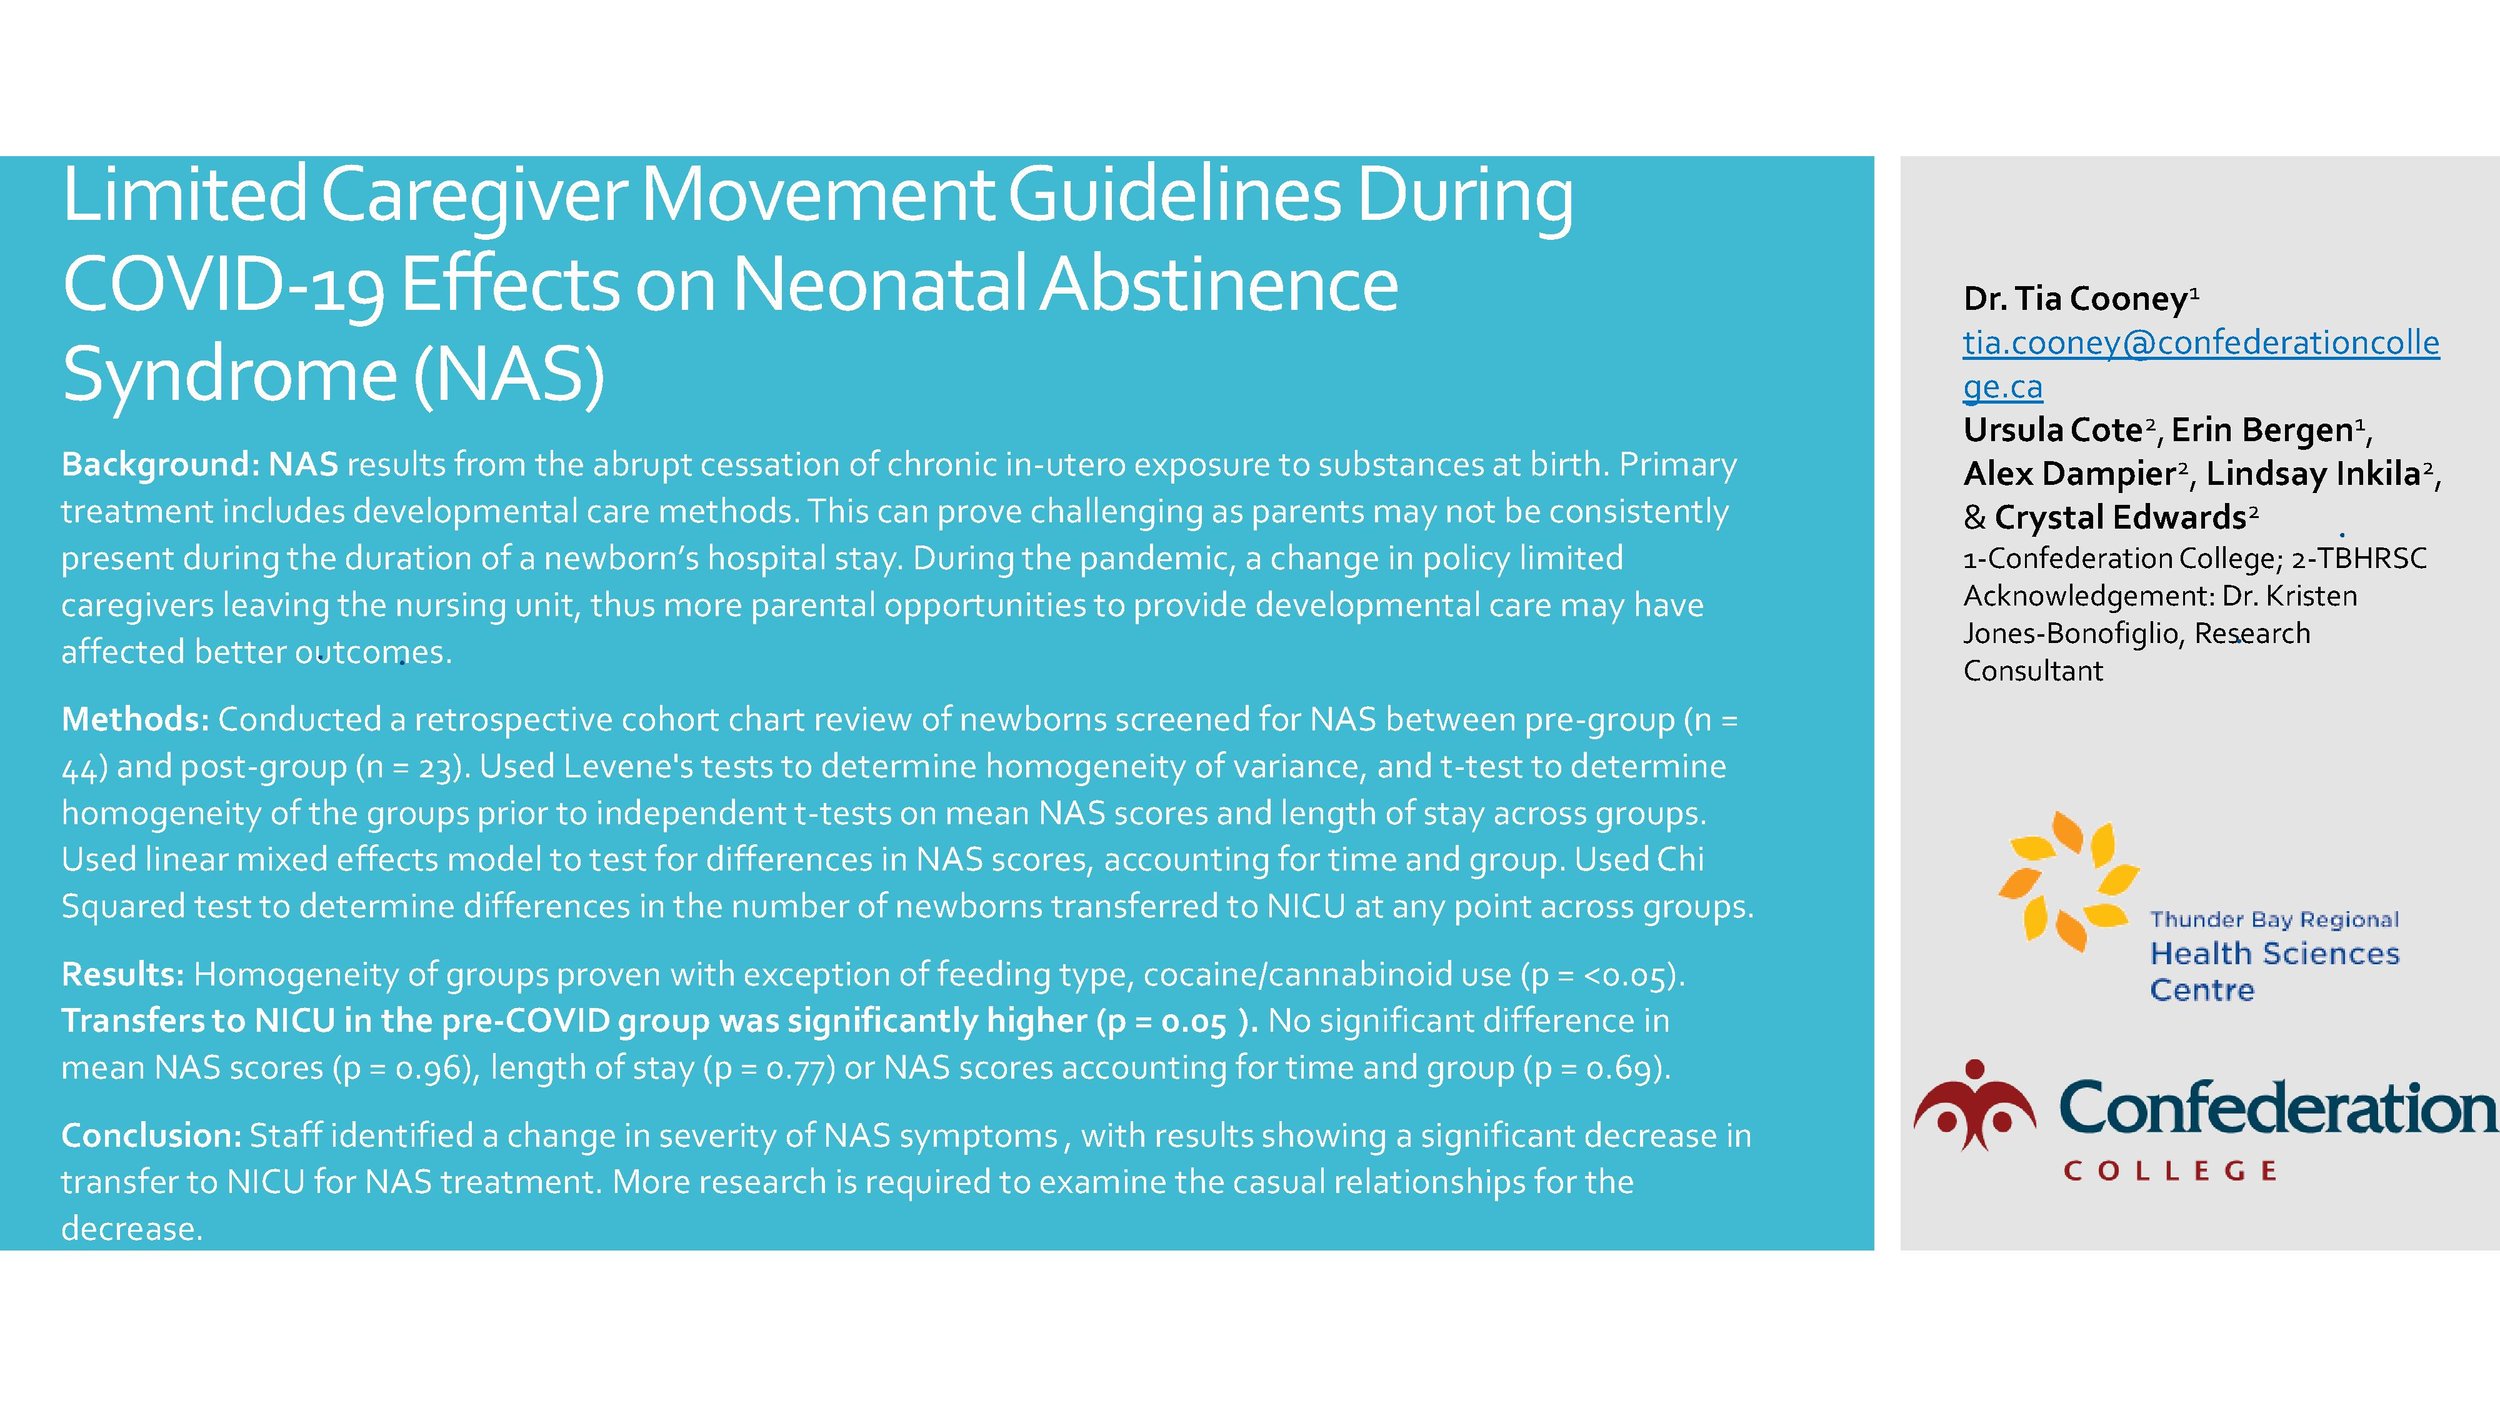 #6 Limited caregiver movement guidelines during COVID-19 effects on Neonatal